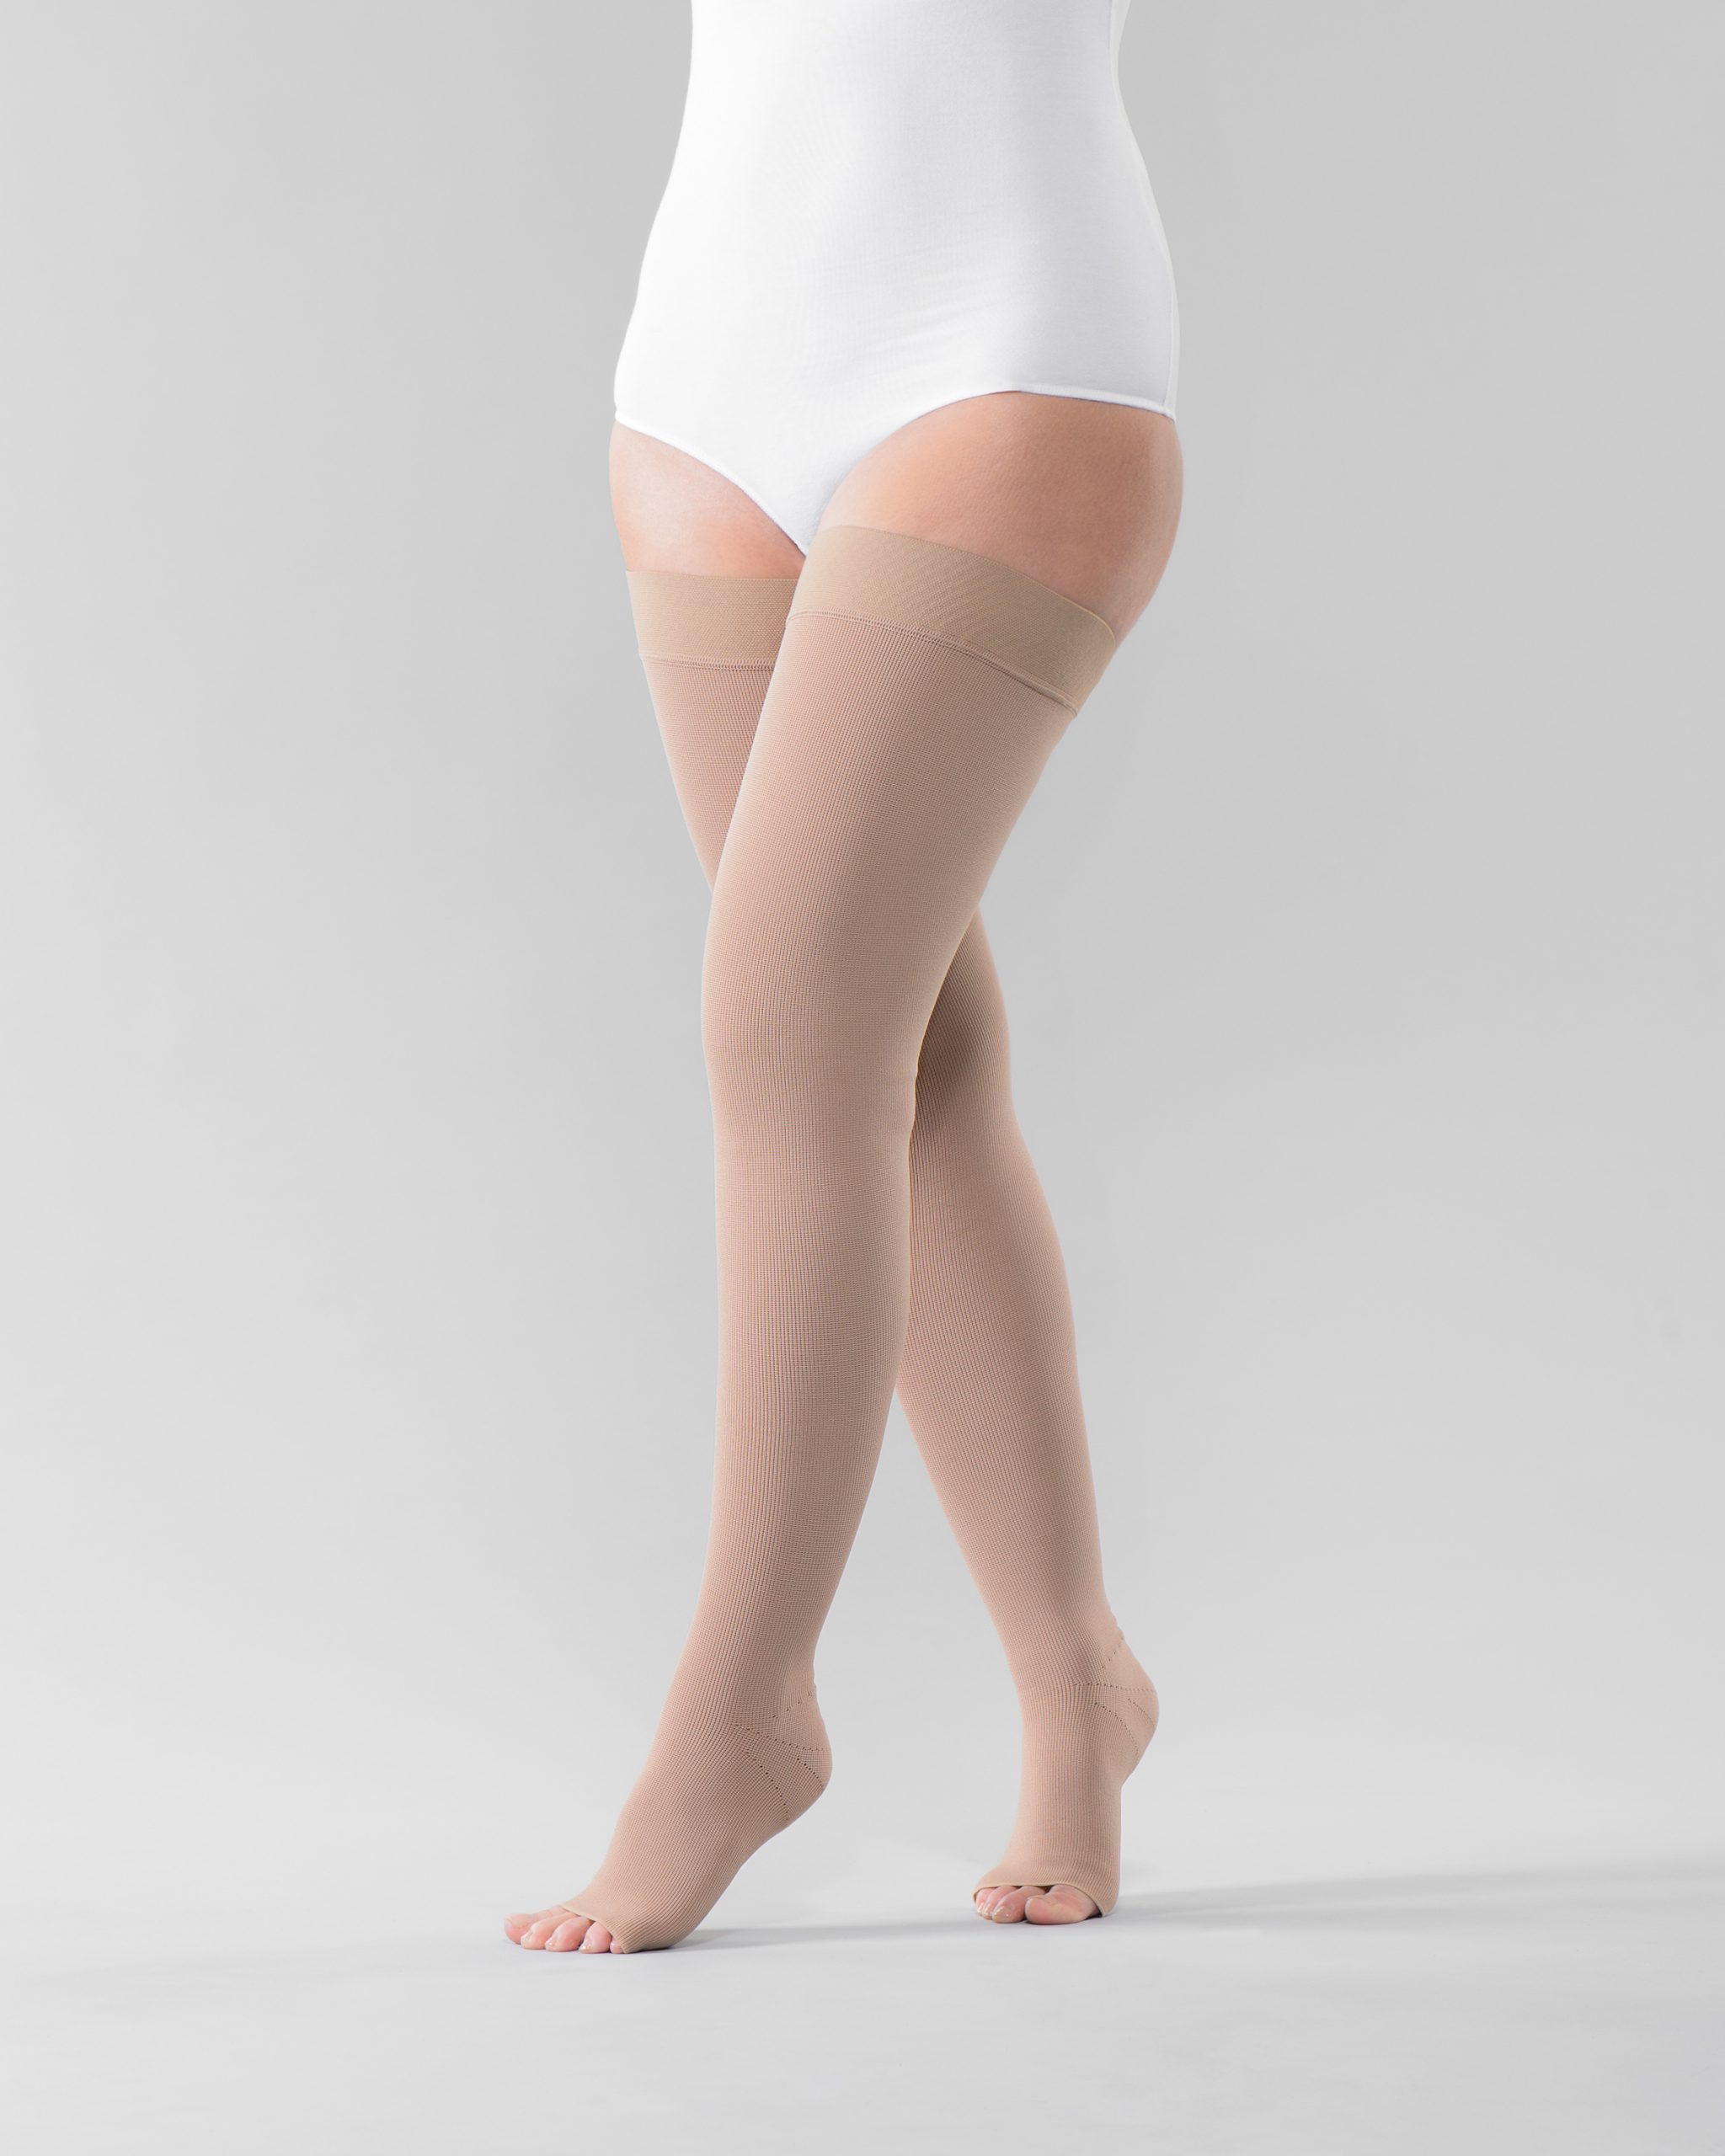 Close Up of Flat Knit Graduated Compression Garments for Leg Lymphedema,  Edema and Lipedema - Powerful Compression Stocking for Stock Photo - Image  of custom, juzousa: 174864390